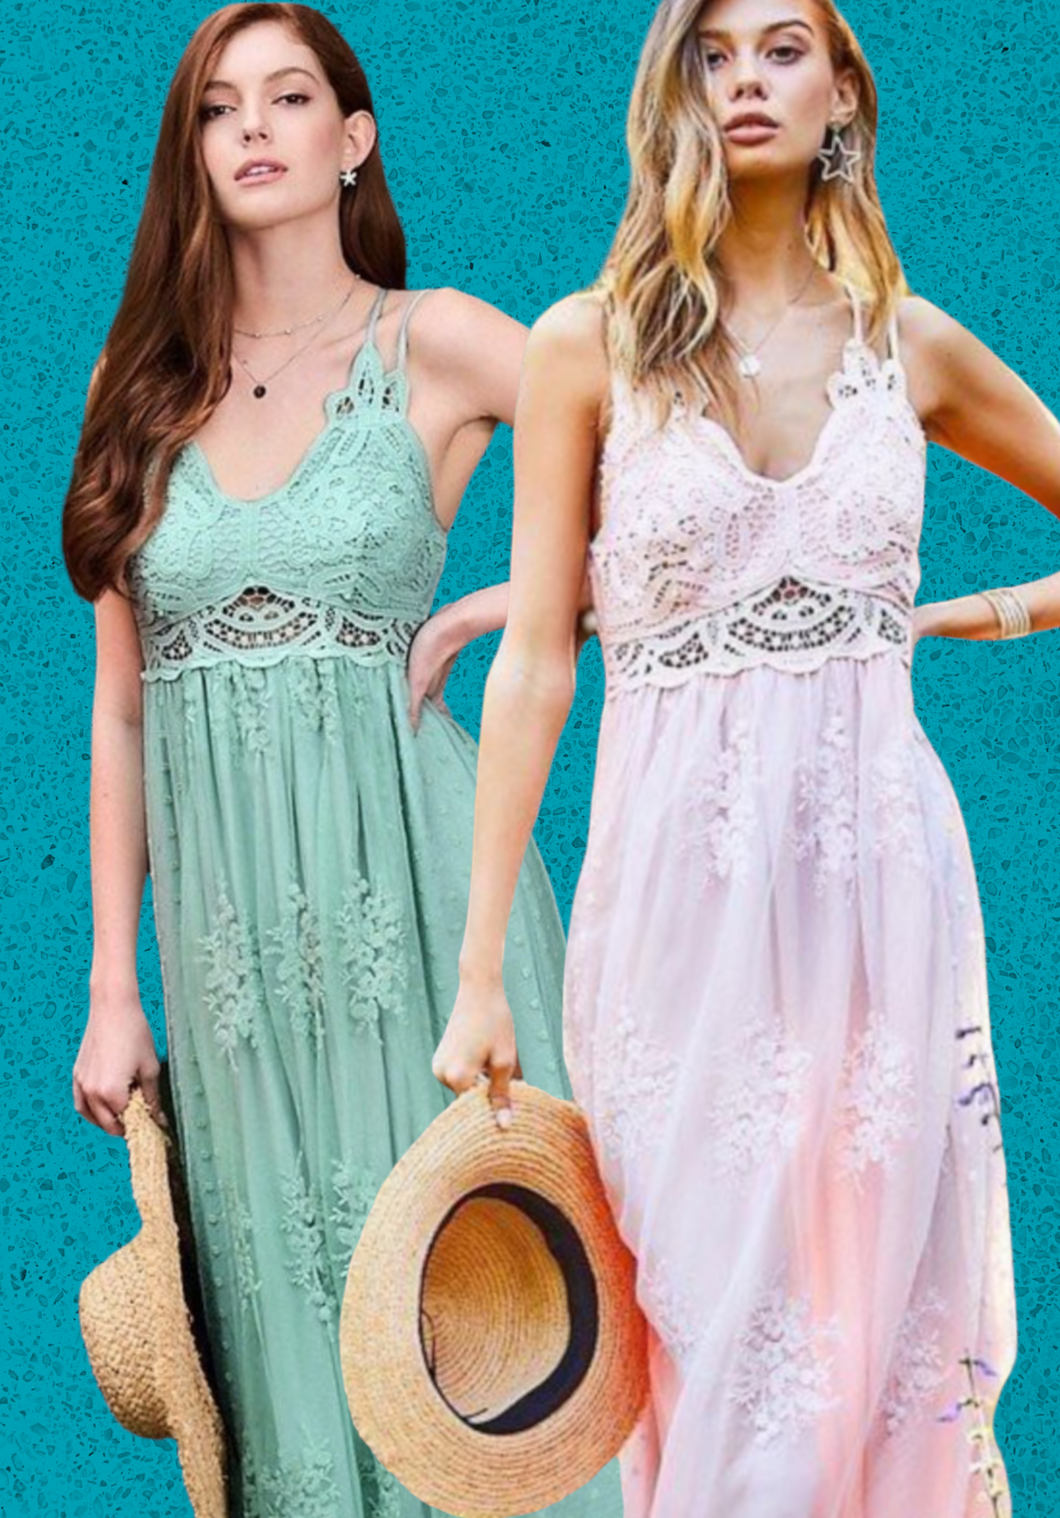 “All of Me” Maxi Dress with Lace Trim